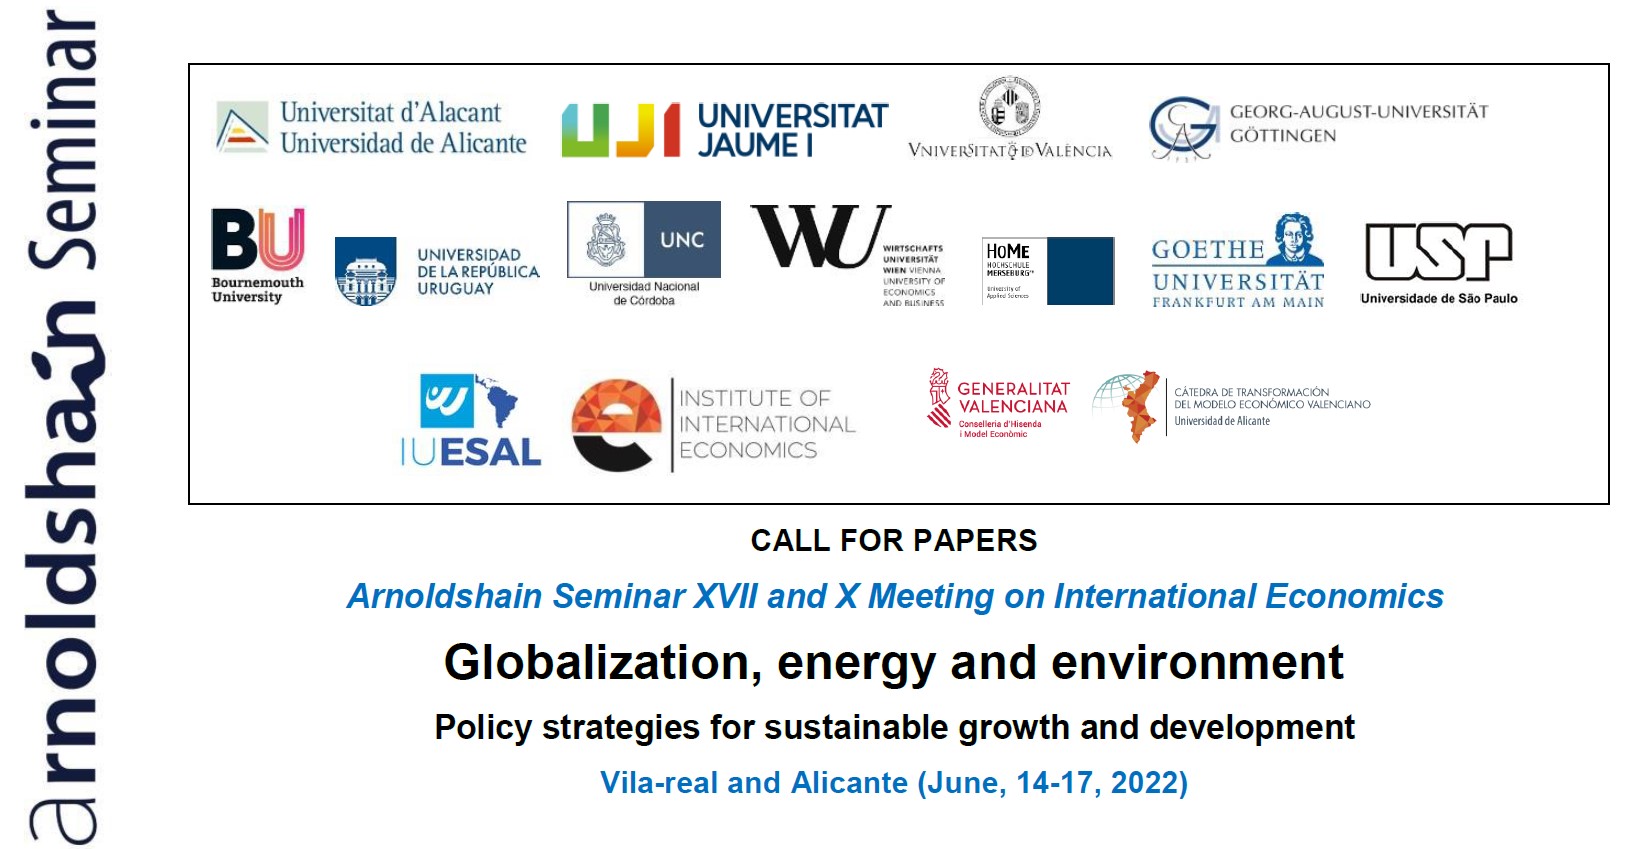 CALL FOR PAPERS:  Arnoldshain Seminar XVII and X Meeting on International Economics  Globalization, energy and environment  Policy strategies for sustainable growth and development / Vila-real and Alicante (June, 14-17, 2022)